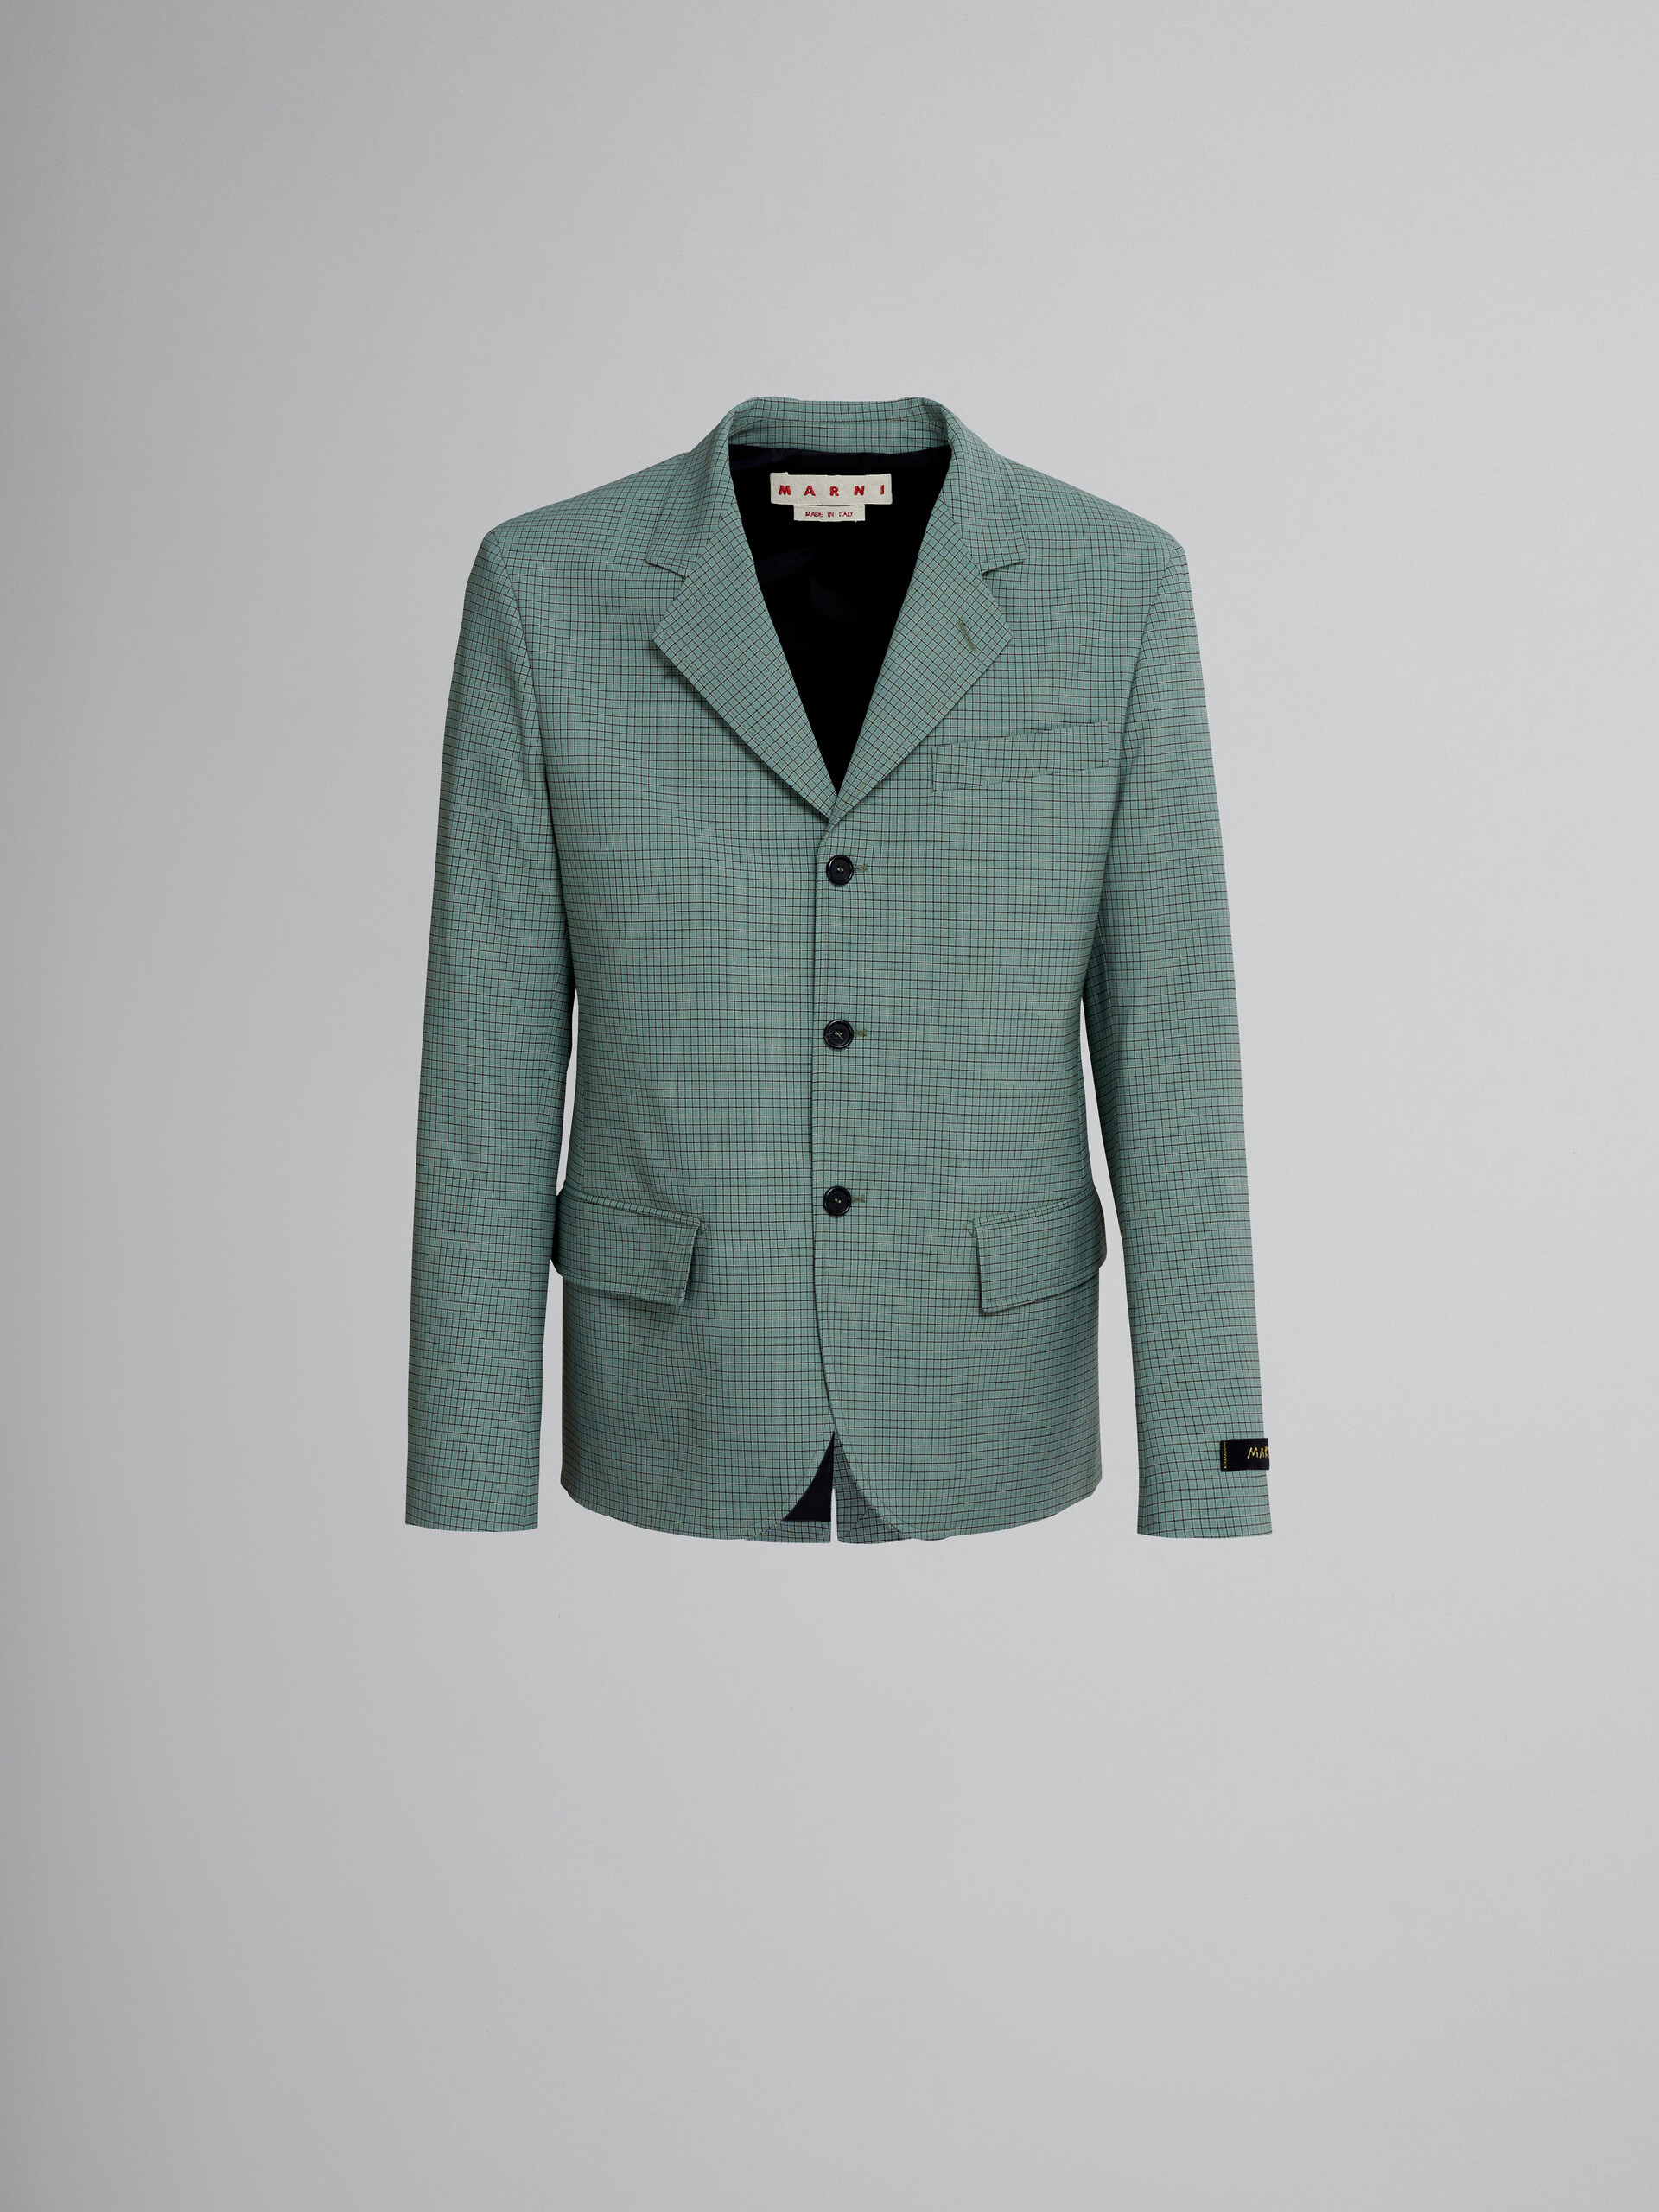 Blazer in tropical wool with green checks - Jackets - Image 1